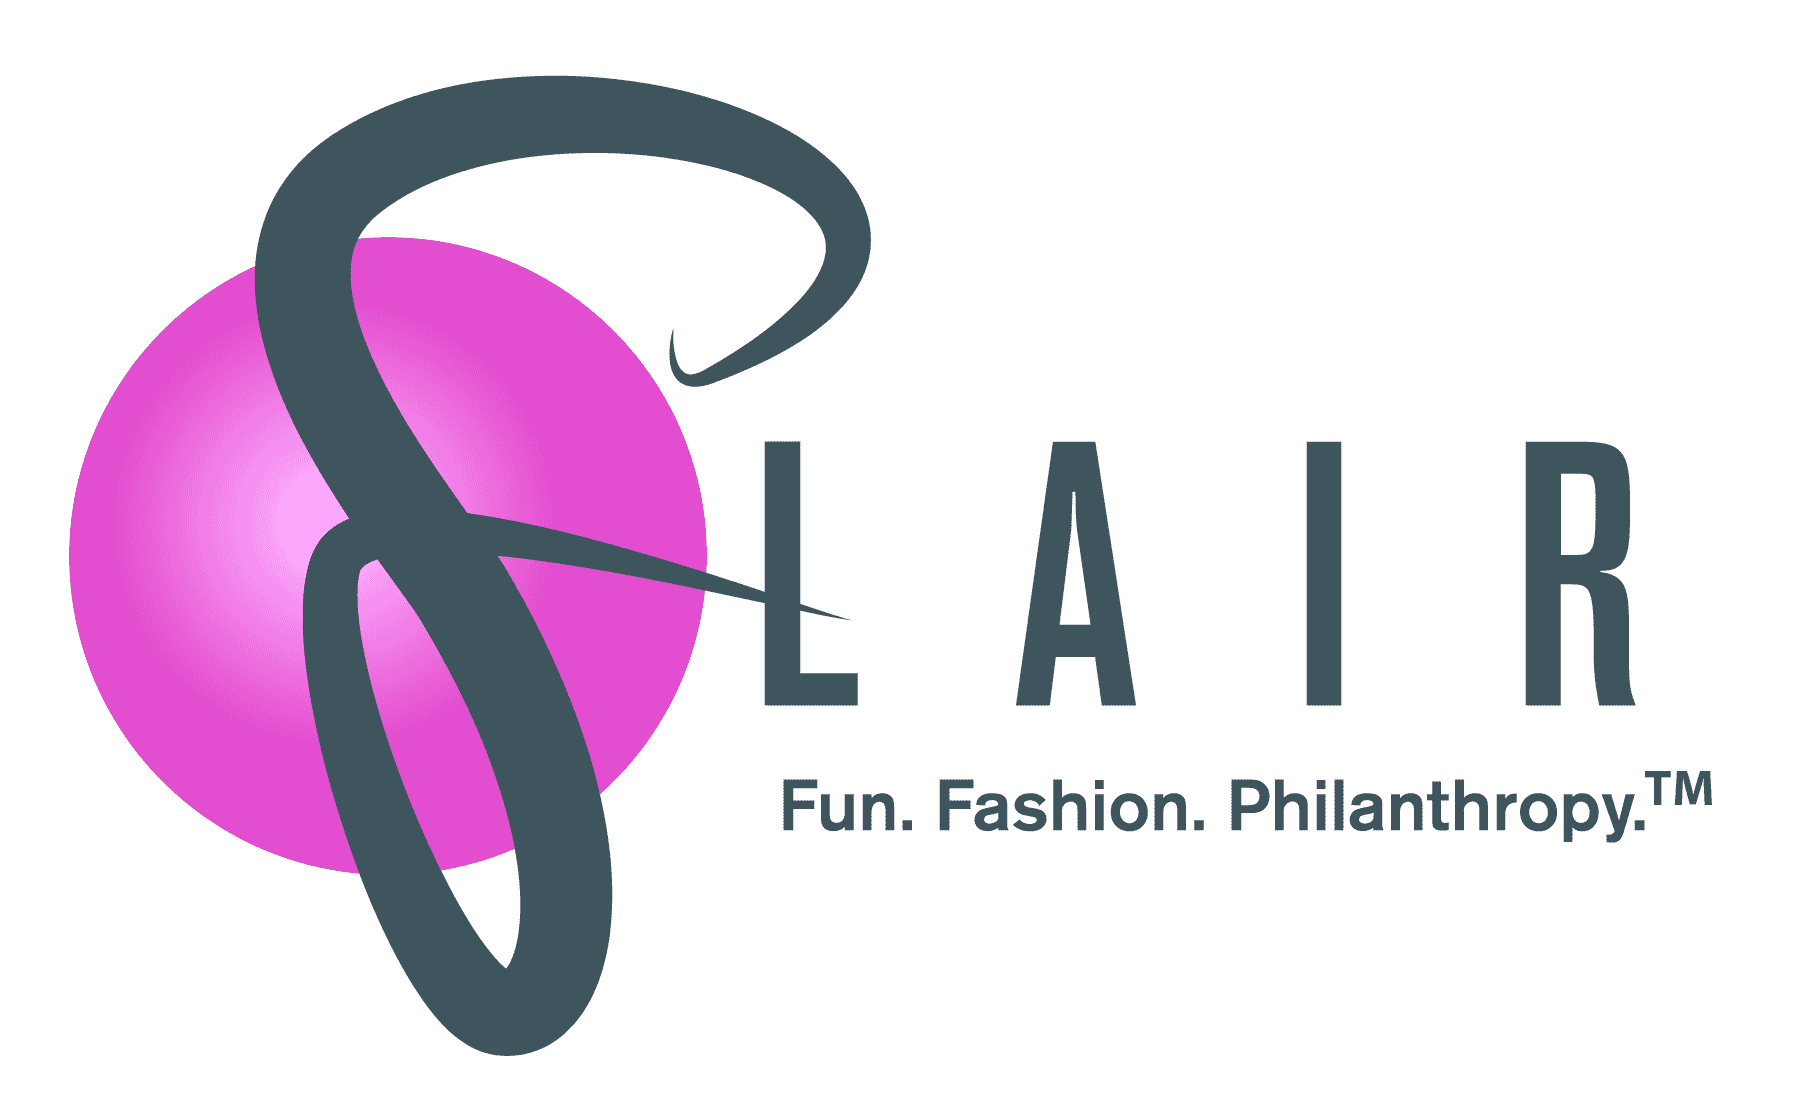 Download Flair Airlines Logo - Full Size PNG Image - PNGkit